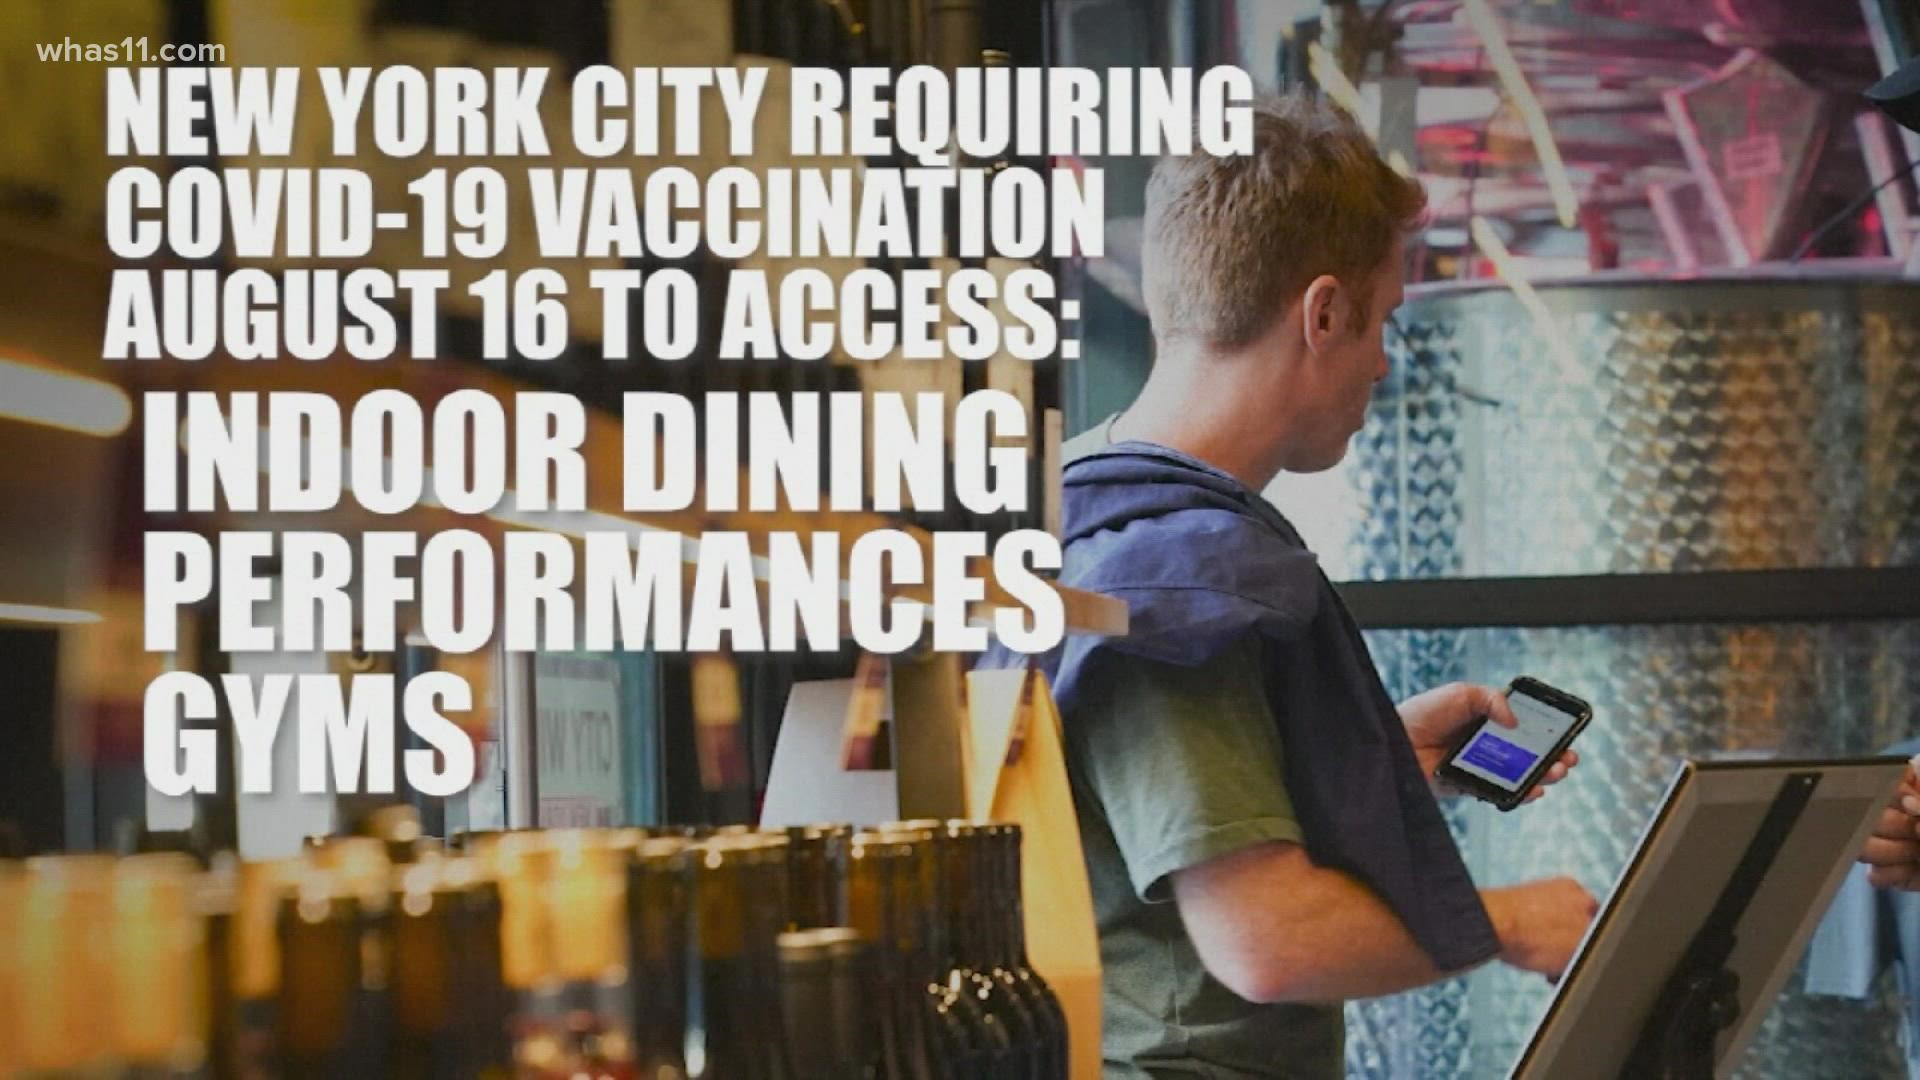 New York City is the first big city in the U.S. to impose vaccination requirements for dining indoors, going to the gym or seeing a performance.